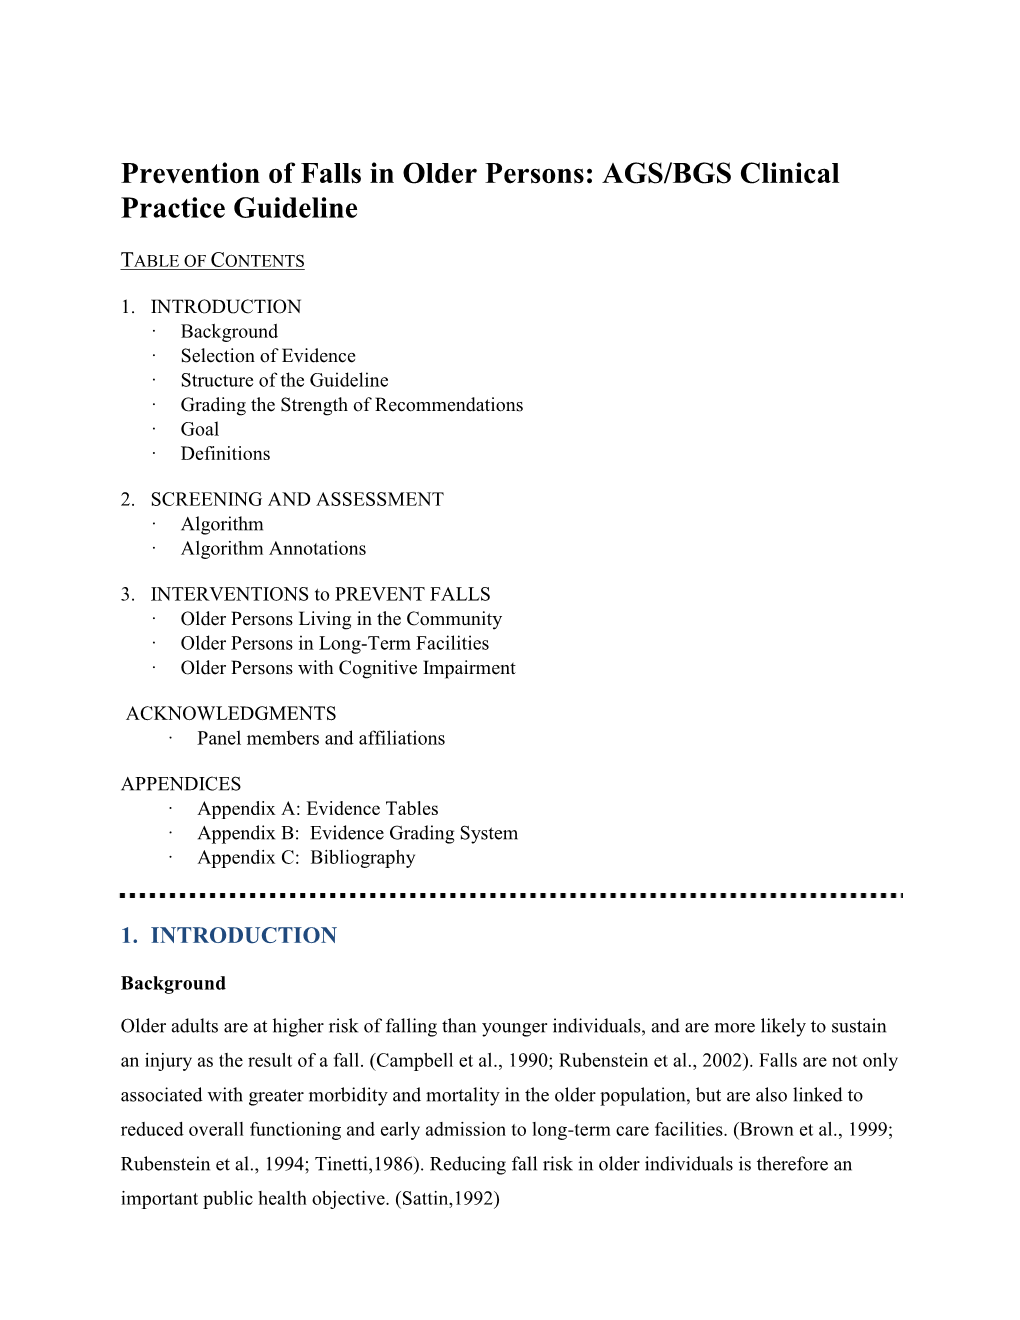 Prevention of Falls in Older Persons: AGS/BGS Clinical Practice Guideline